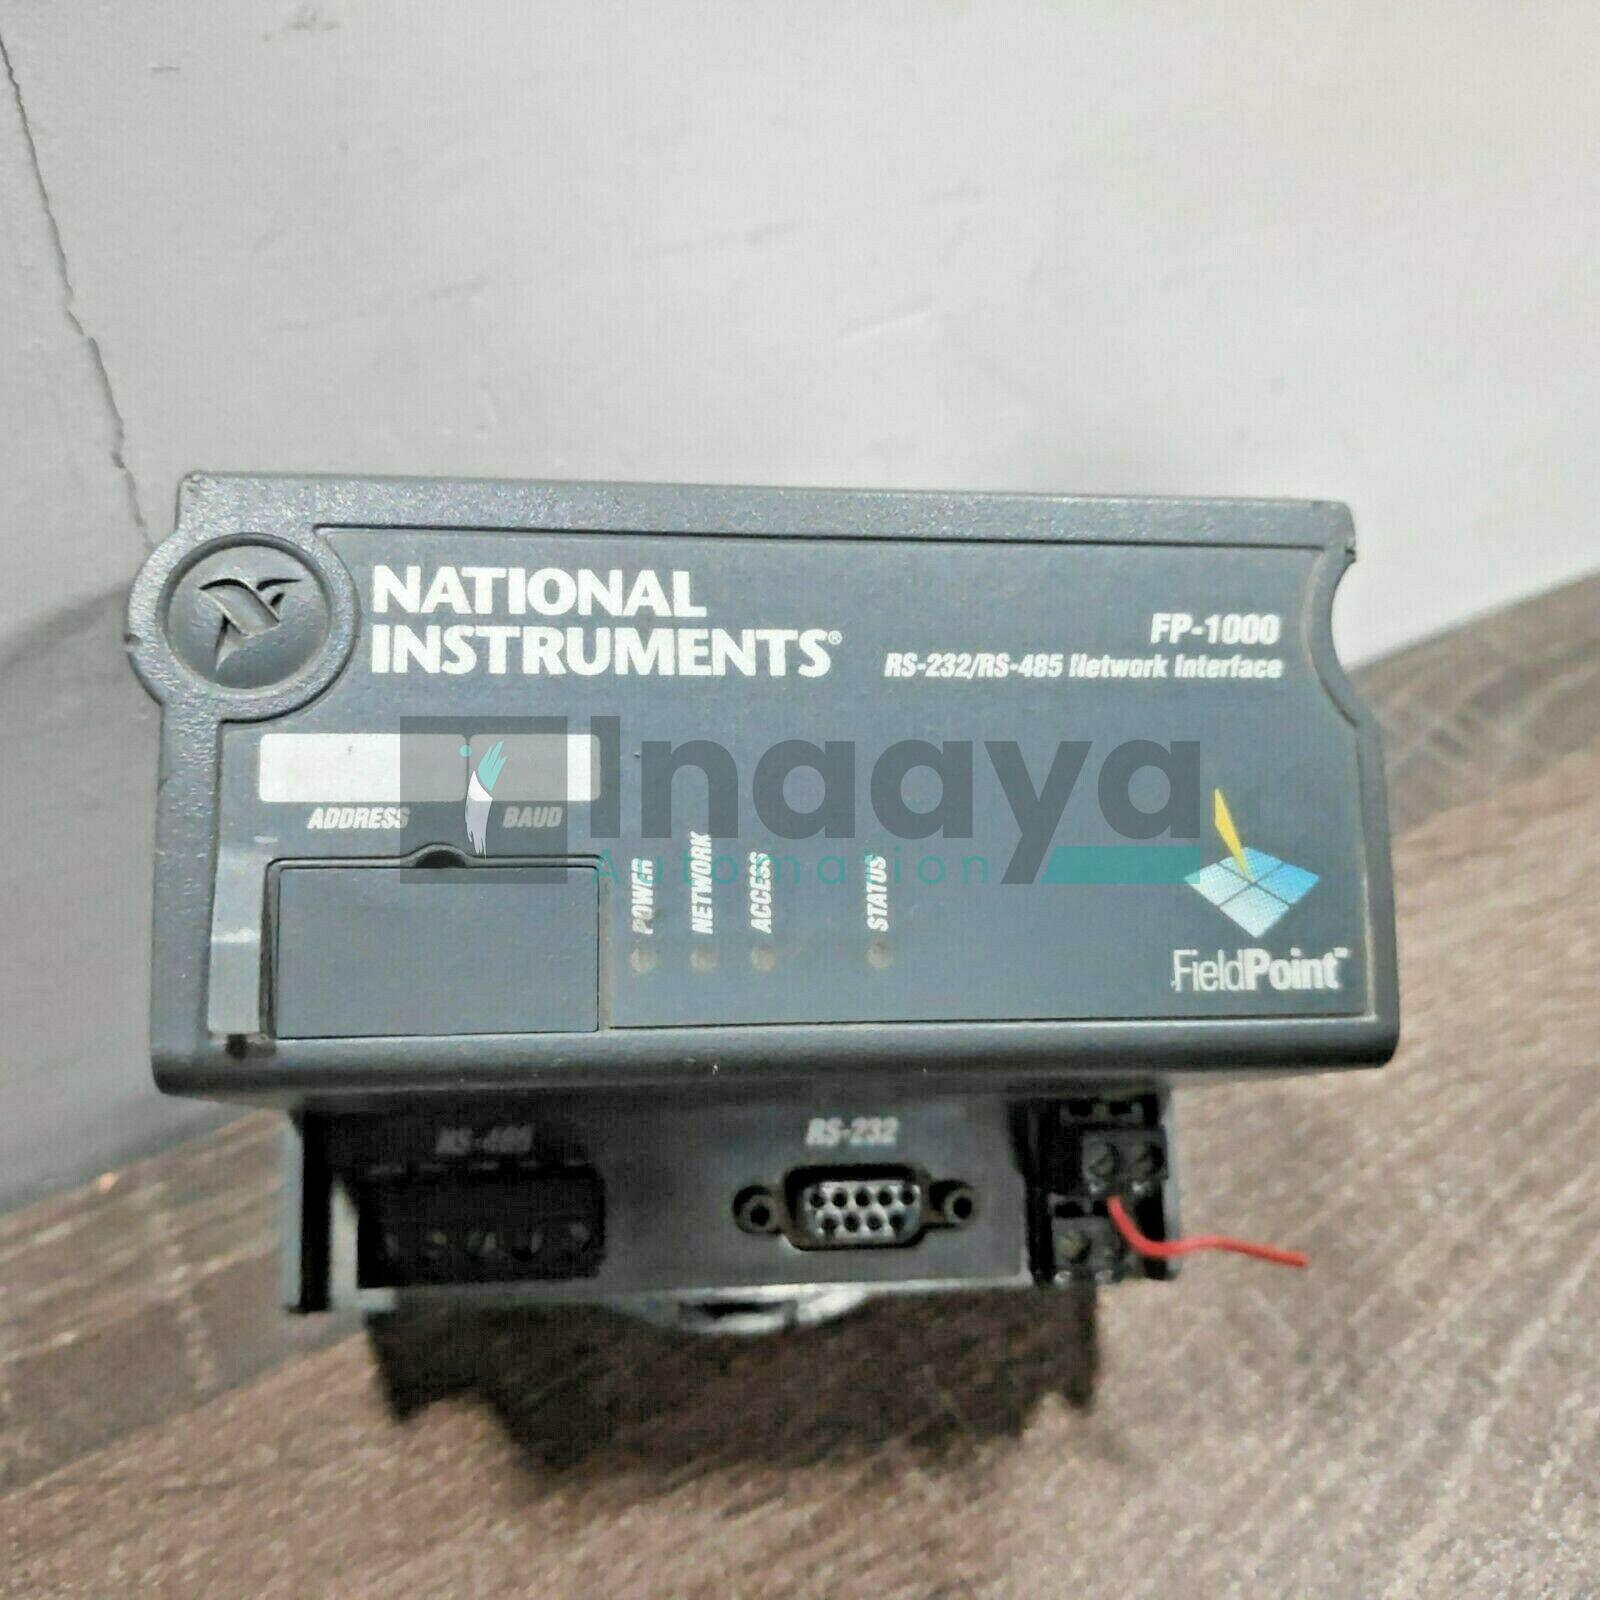 NATIONAL INSTRUMENTS FP-1000 NETWORK INTERFACE MODULE